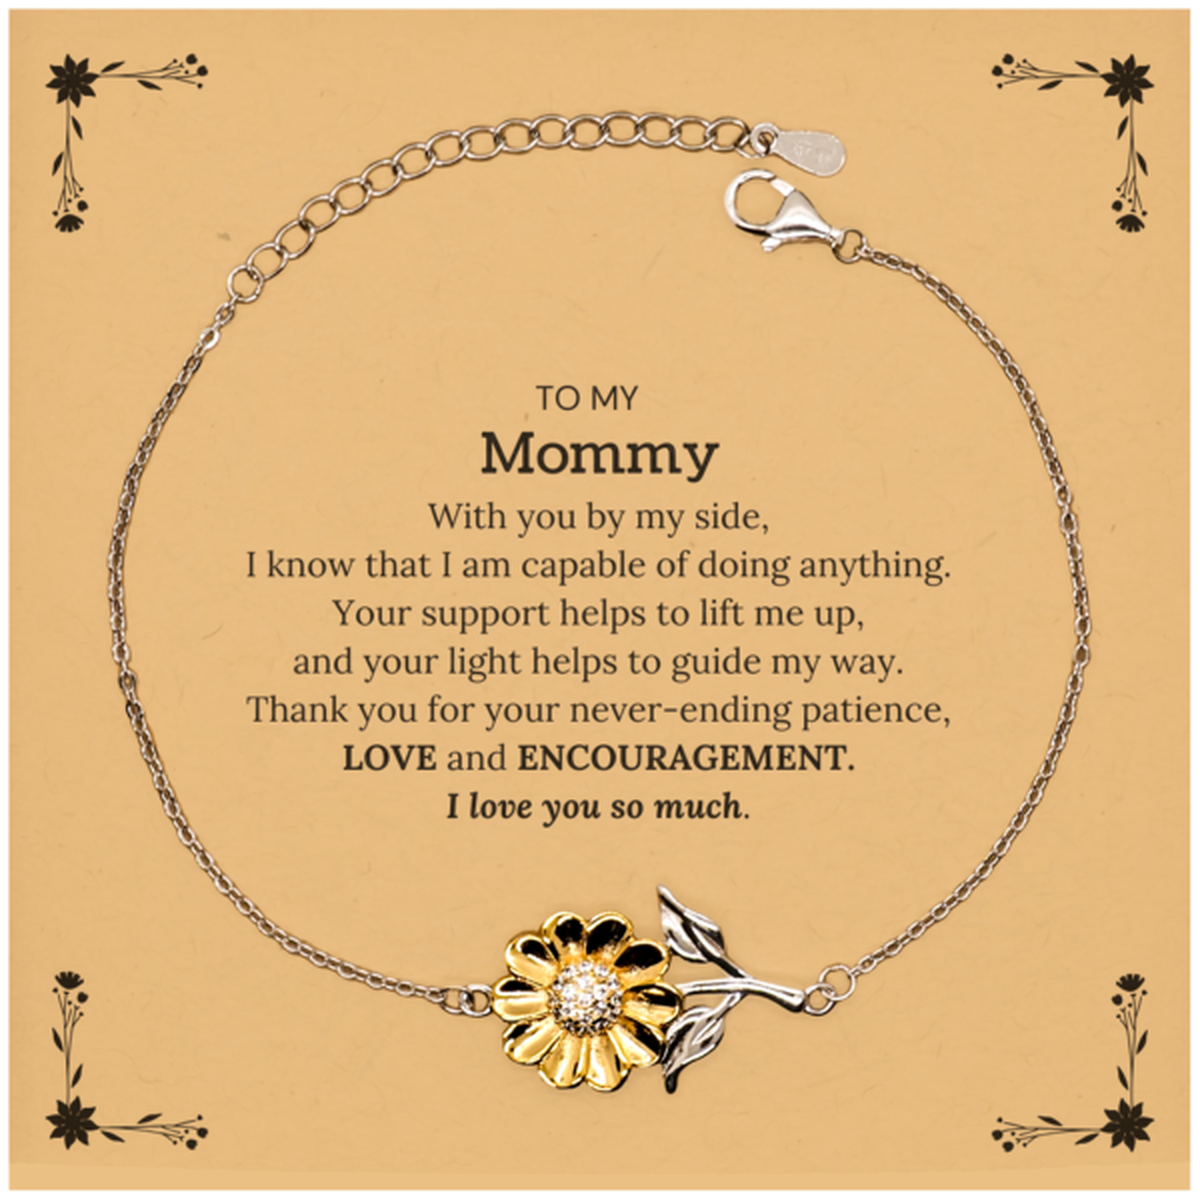 Appreciation Mommy Sunflower Bracelet Gifts, To My Mommy Birthday Christmas Wedding Keepsake Gifts for Mommy With you by my side, I know that I am capable of doing anything. I love you so much